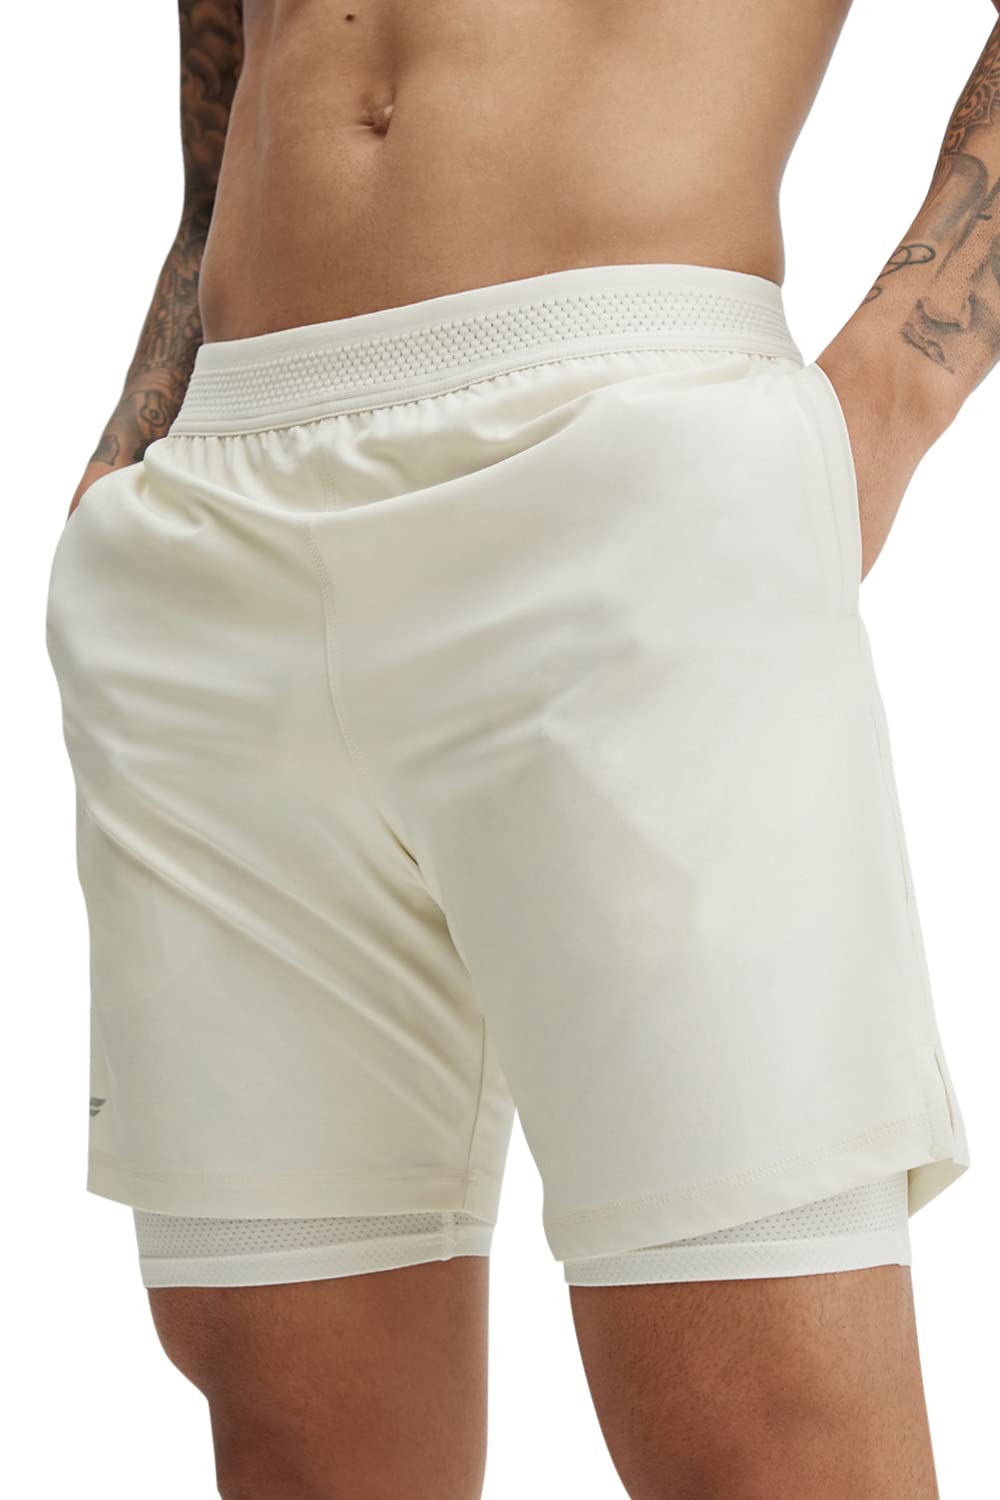 Fabletics shorts men's and discuss various aspects such as design, performance features, fabric technology, versatility